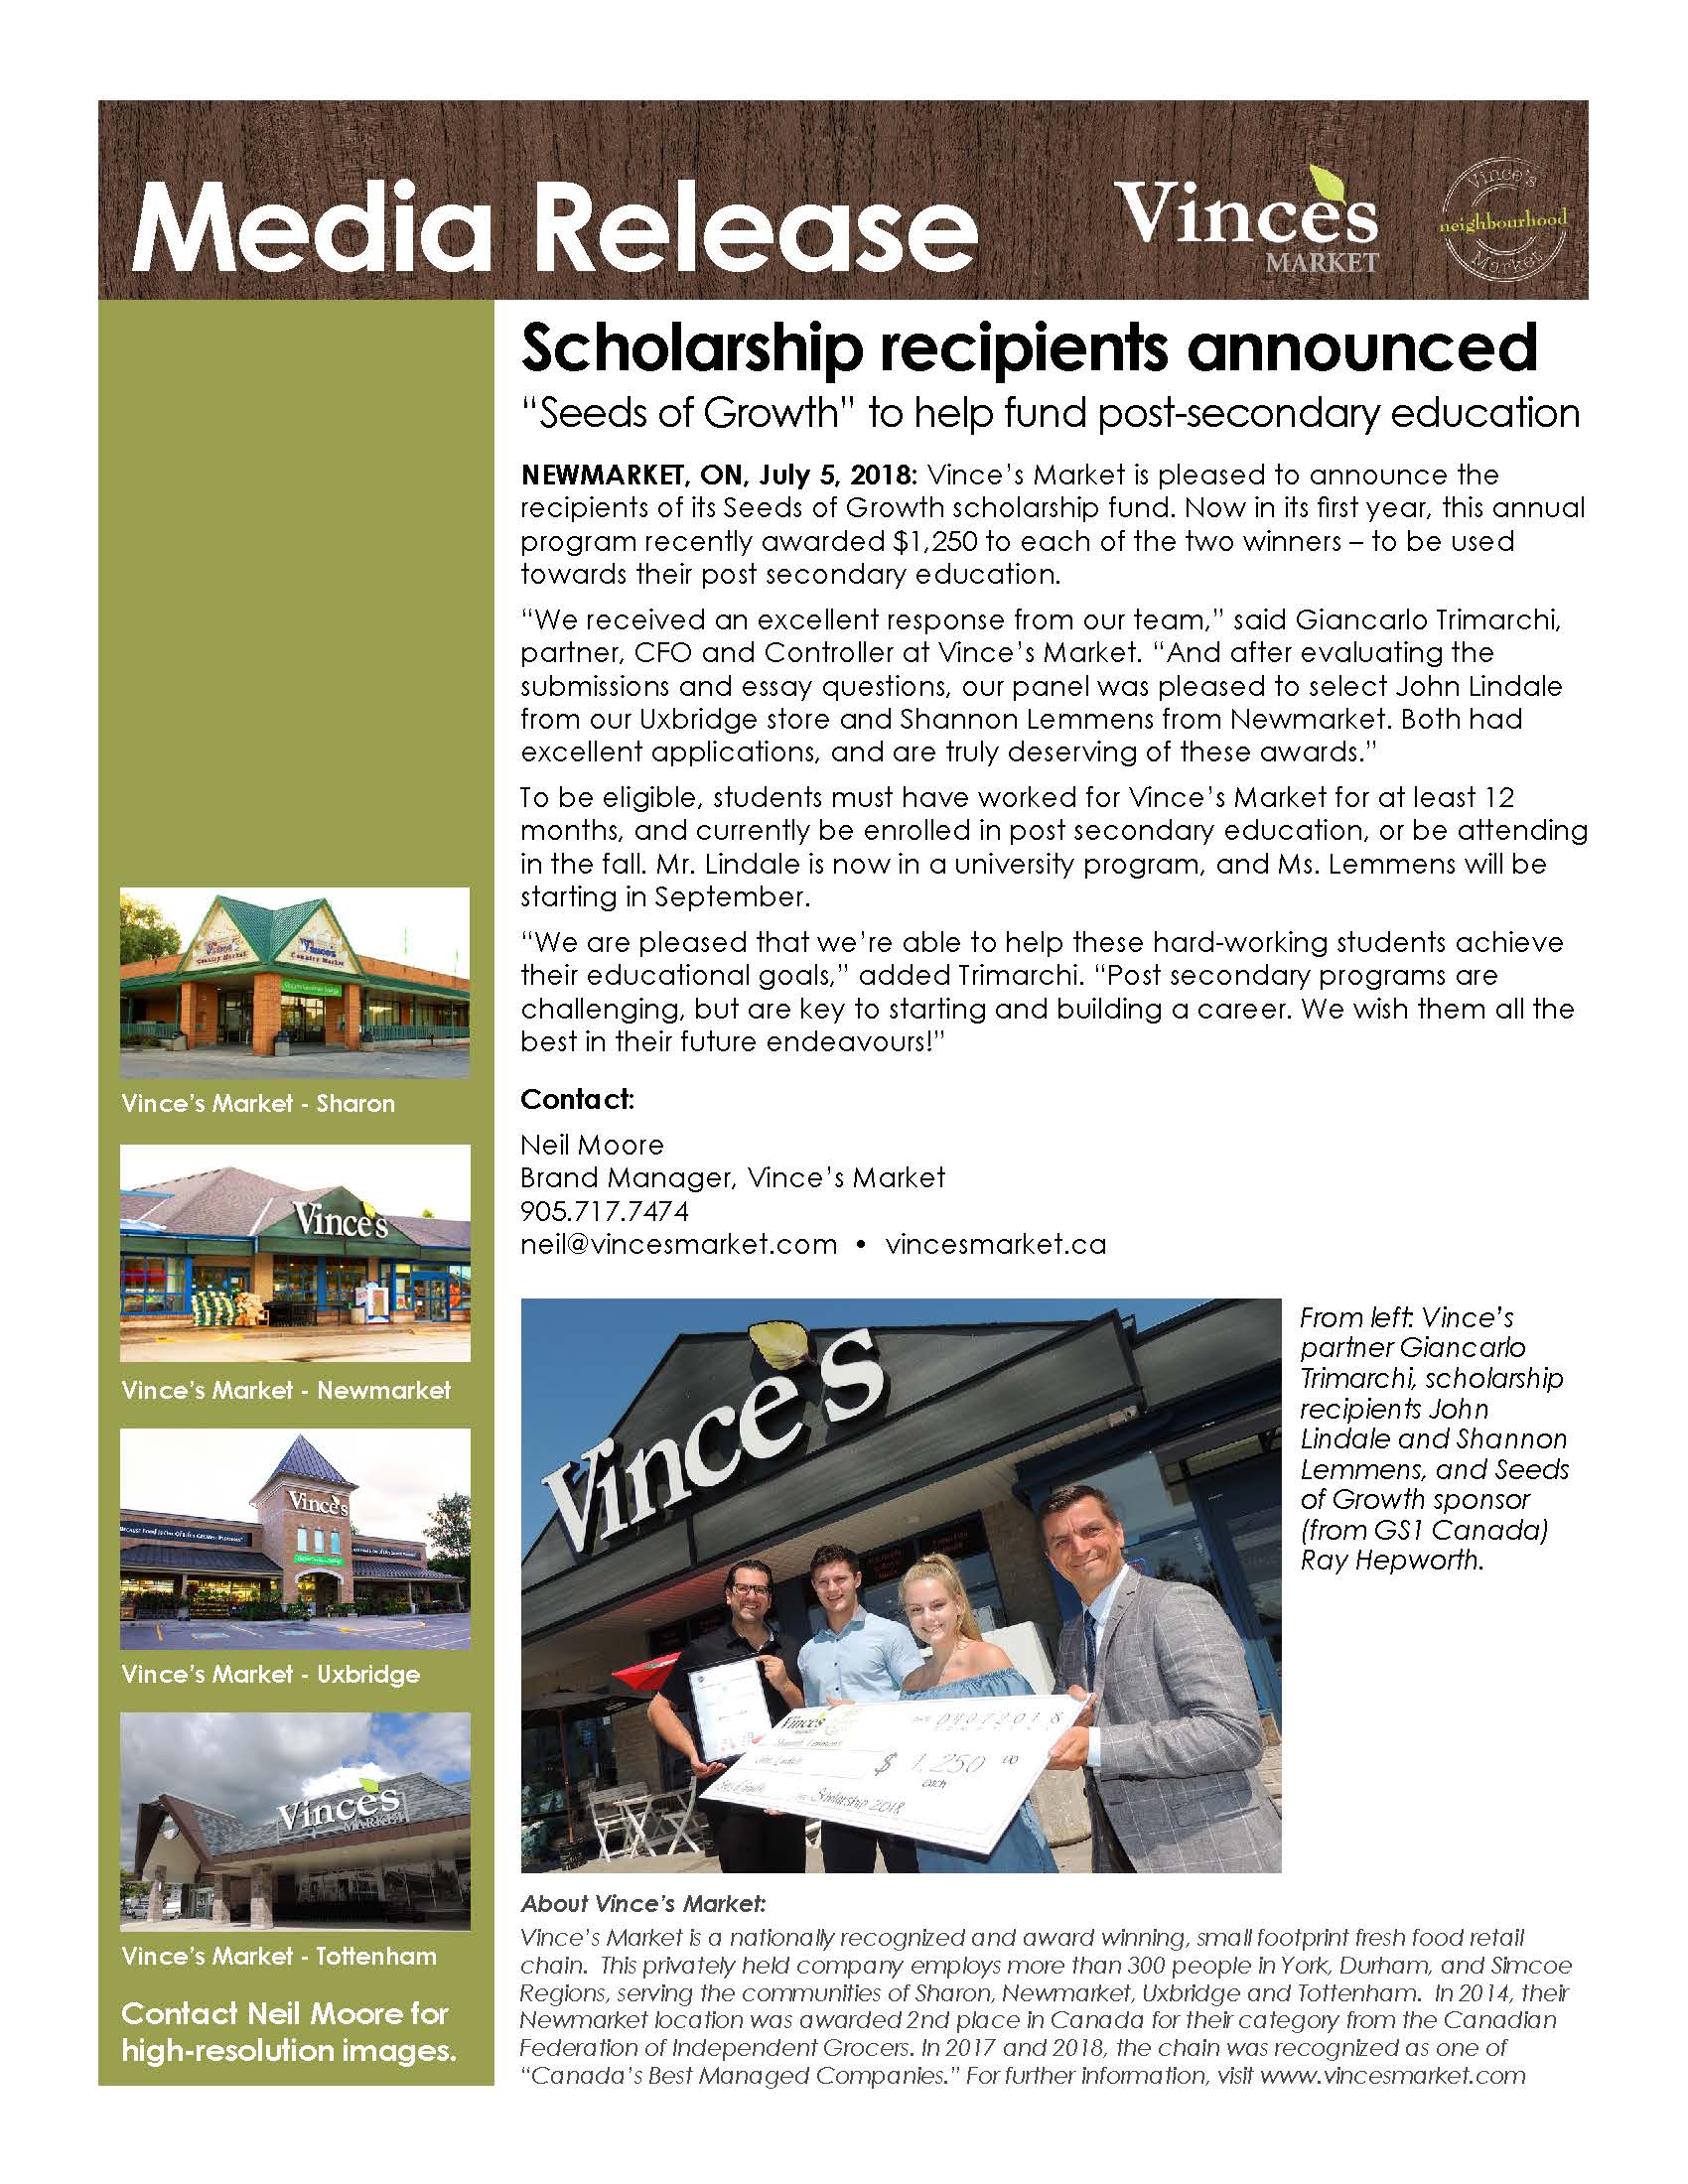 Vince's Market media release-Seeds of Growth